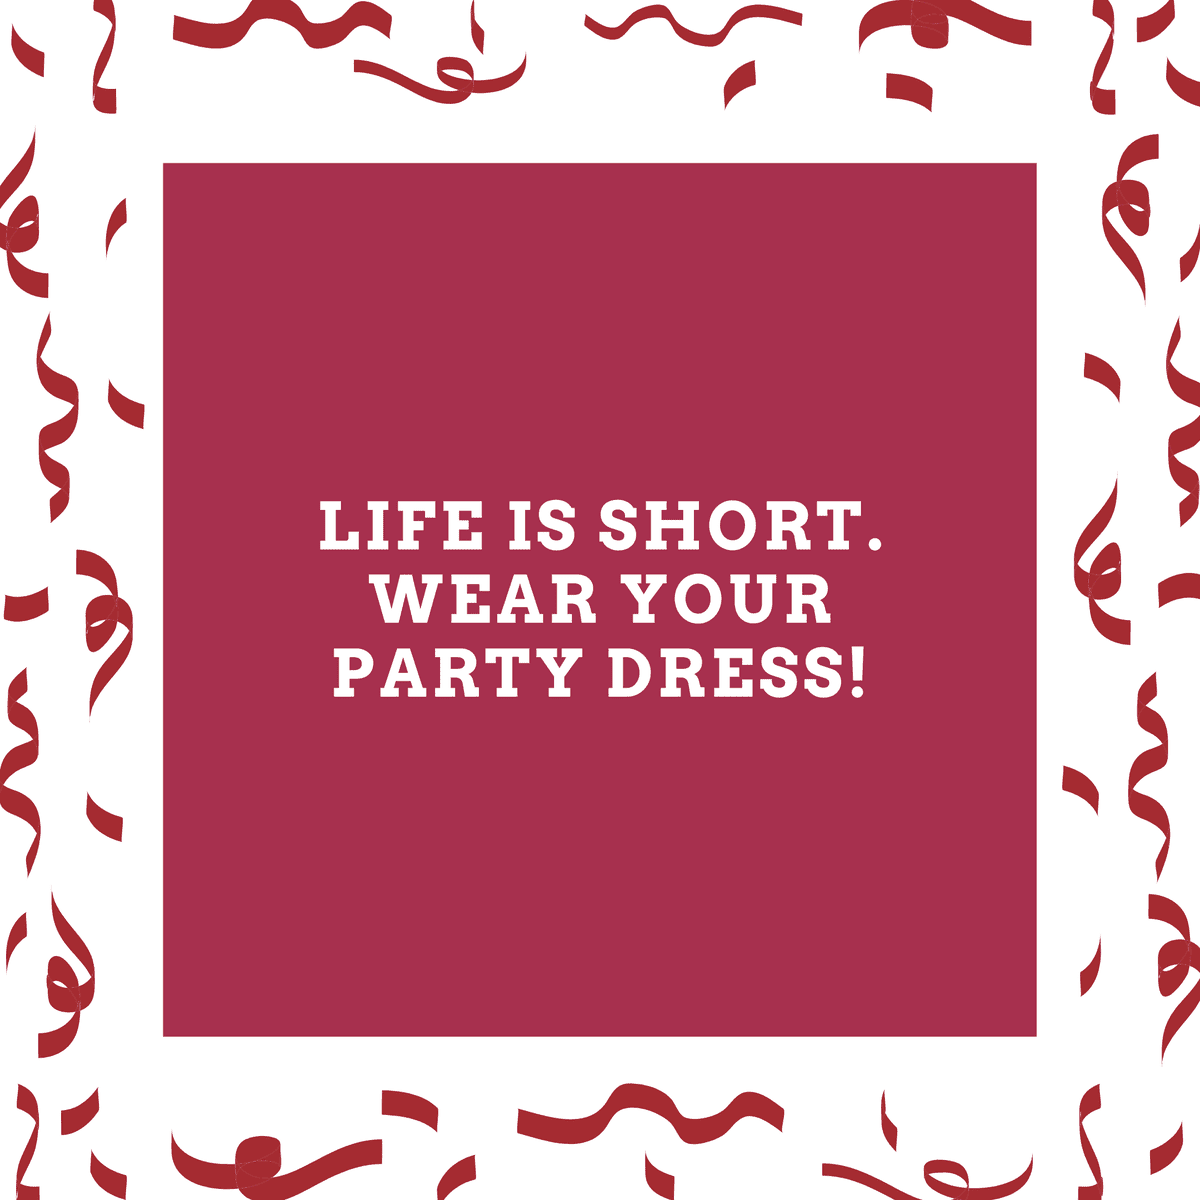 Life is short. Wear your party dress!